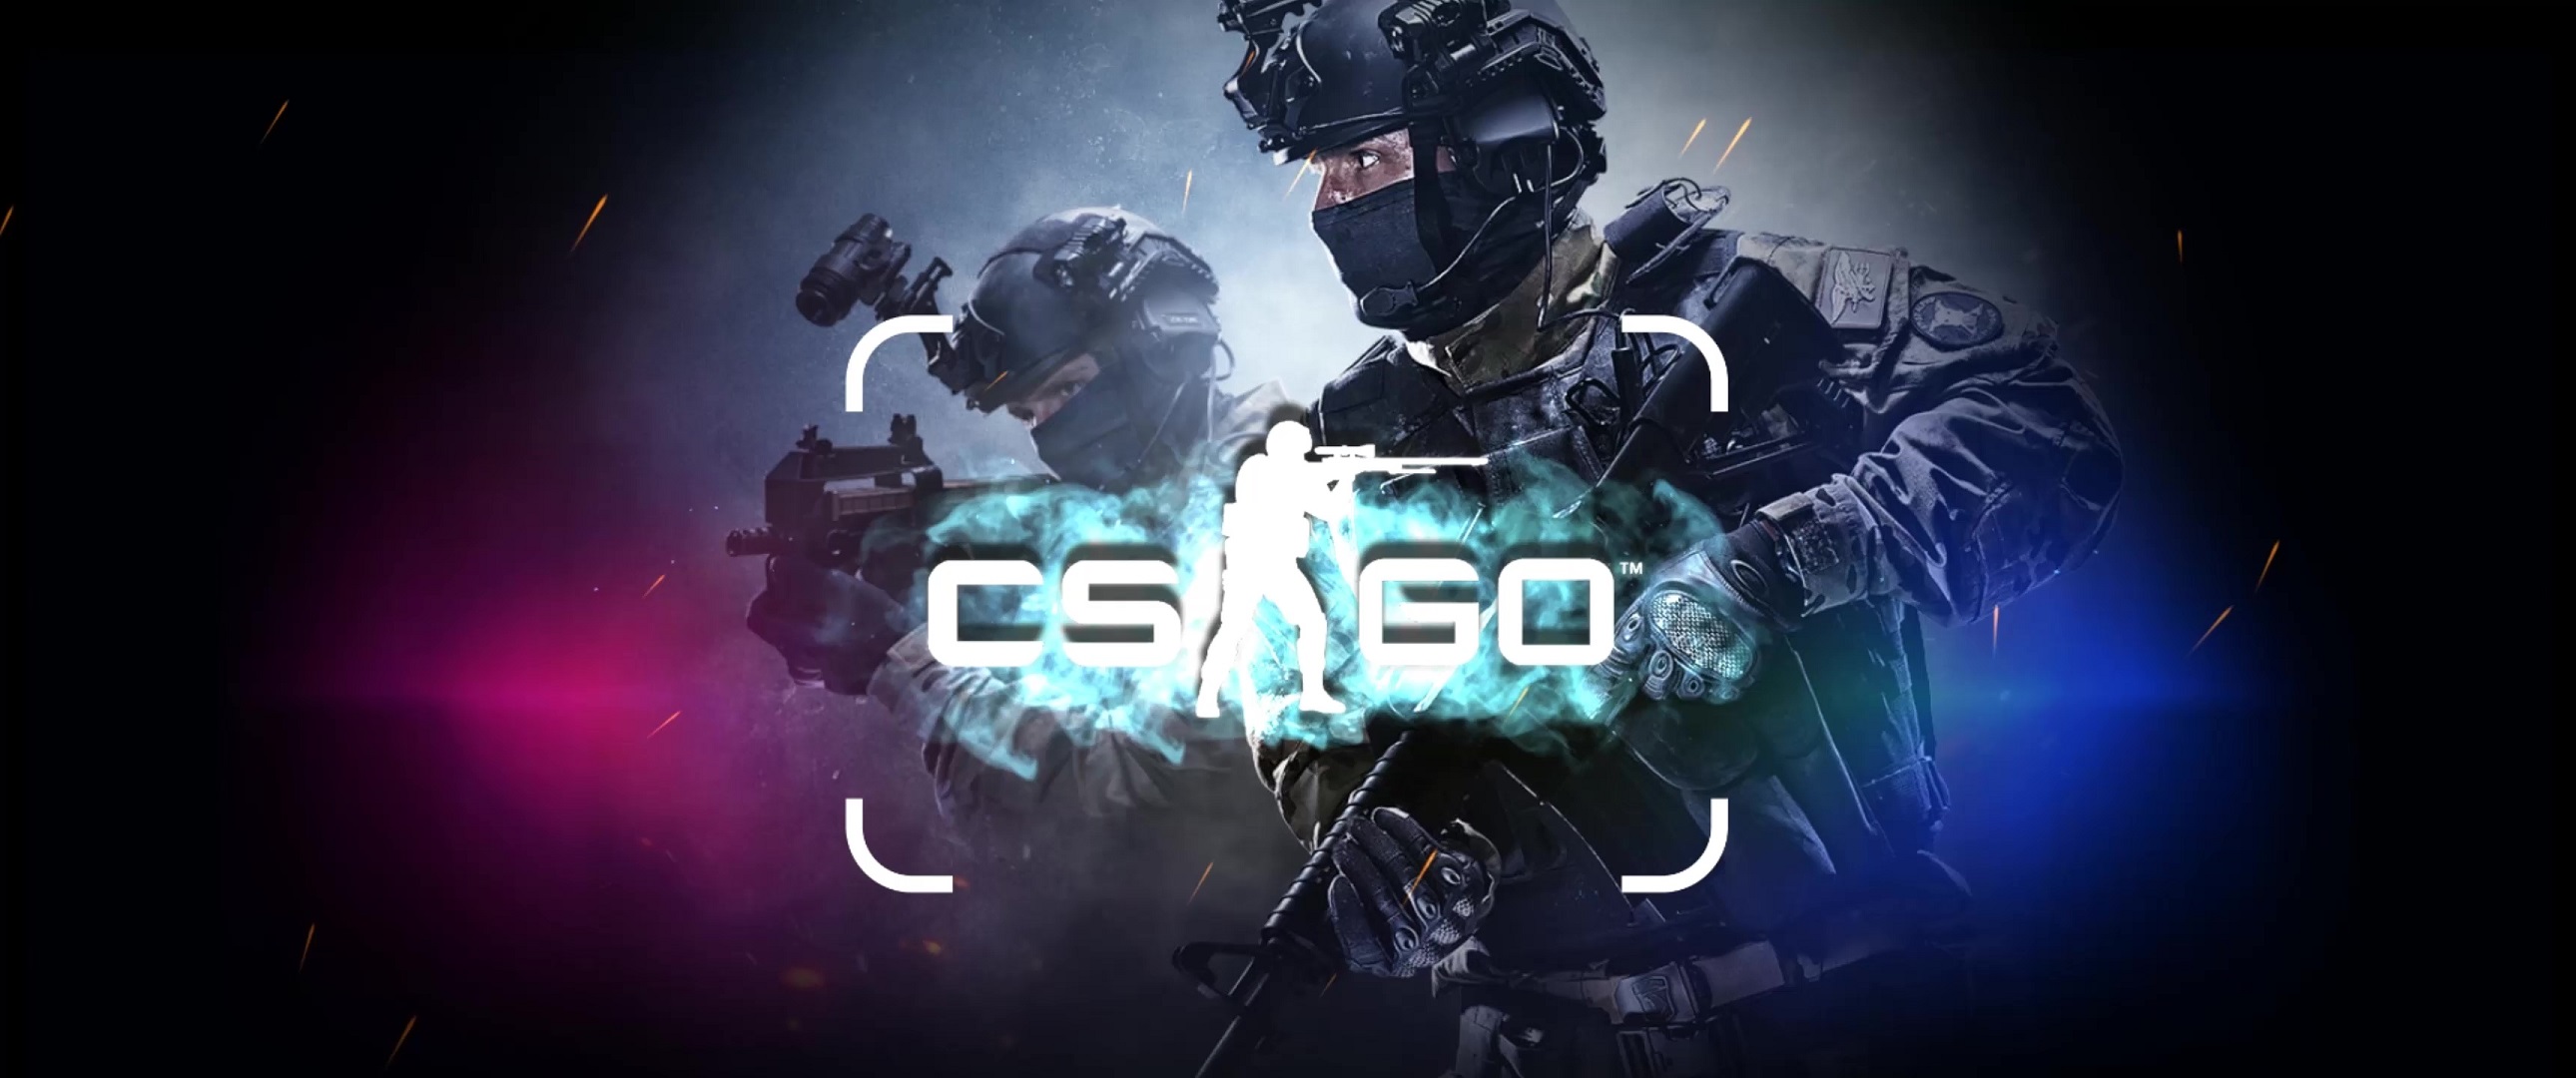 Download CS Go Live Wallpaper Engine Free, Most Fascinating Live Wallpaper  For PC